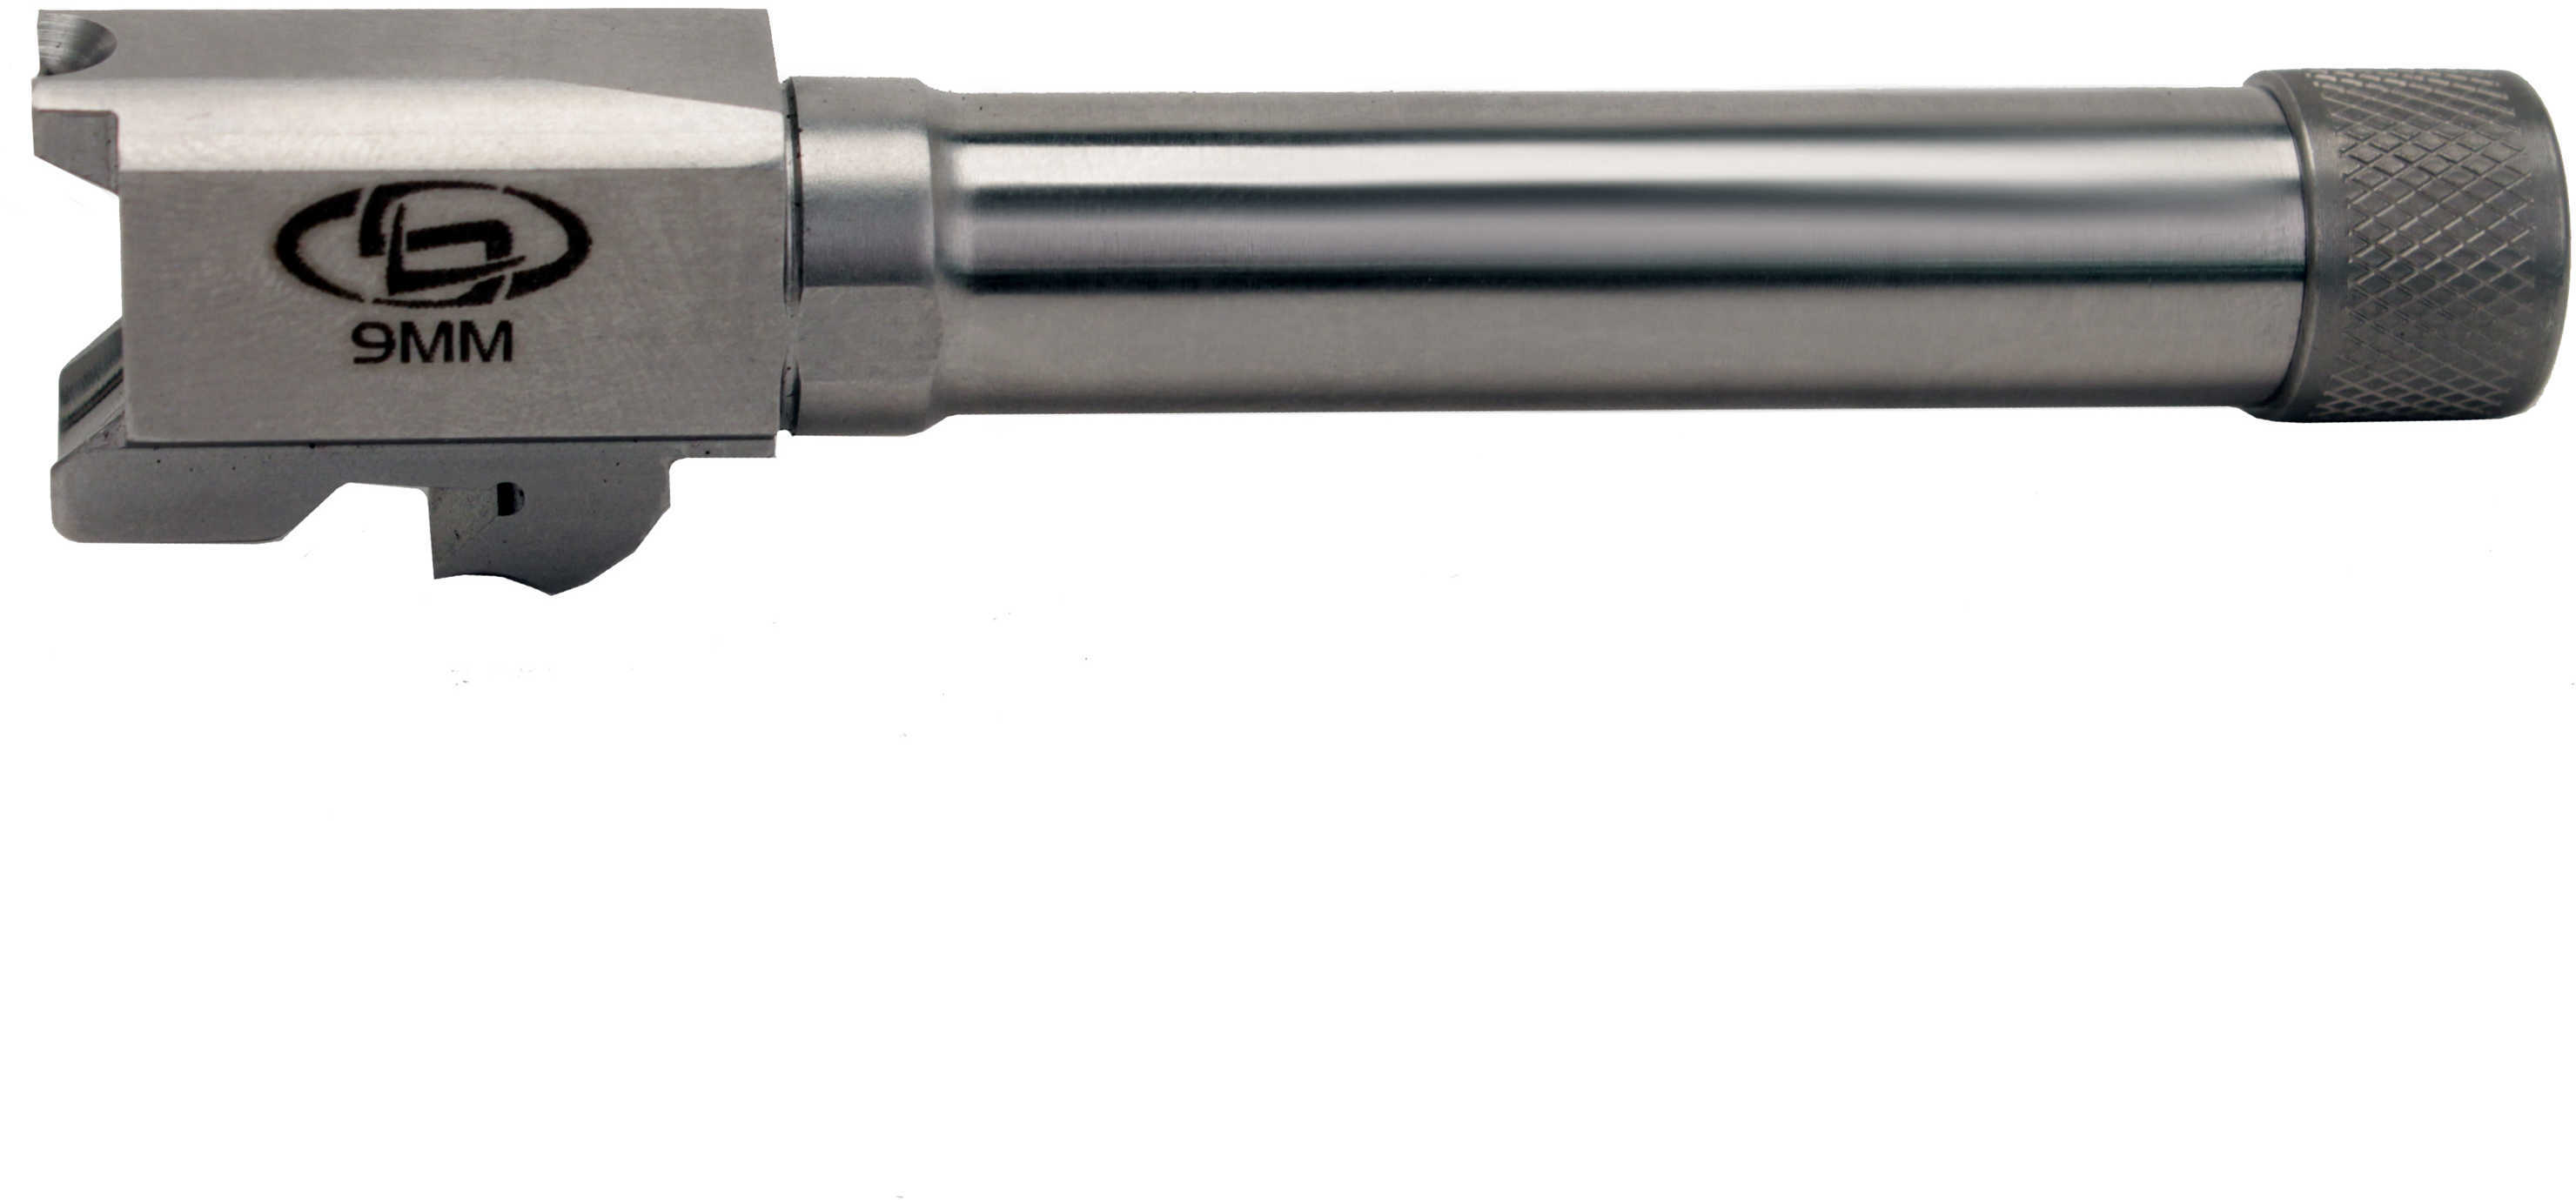 StormLake Barrels 9MM 4.28" Fits Smith & Wesson Compact Stainless Finish 1/2-28 Thread with Protect